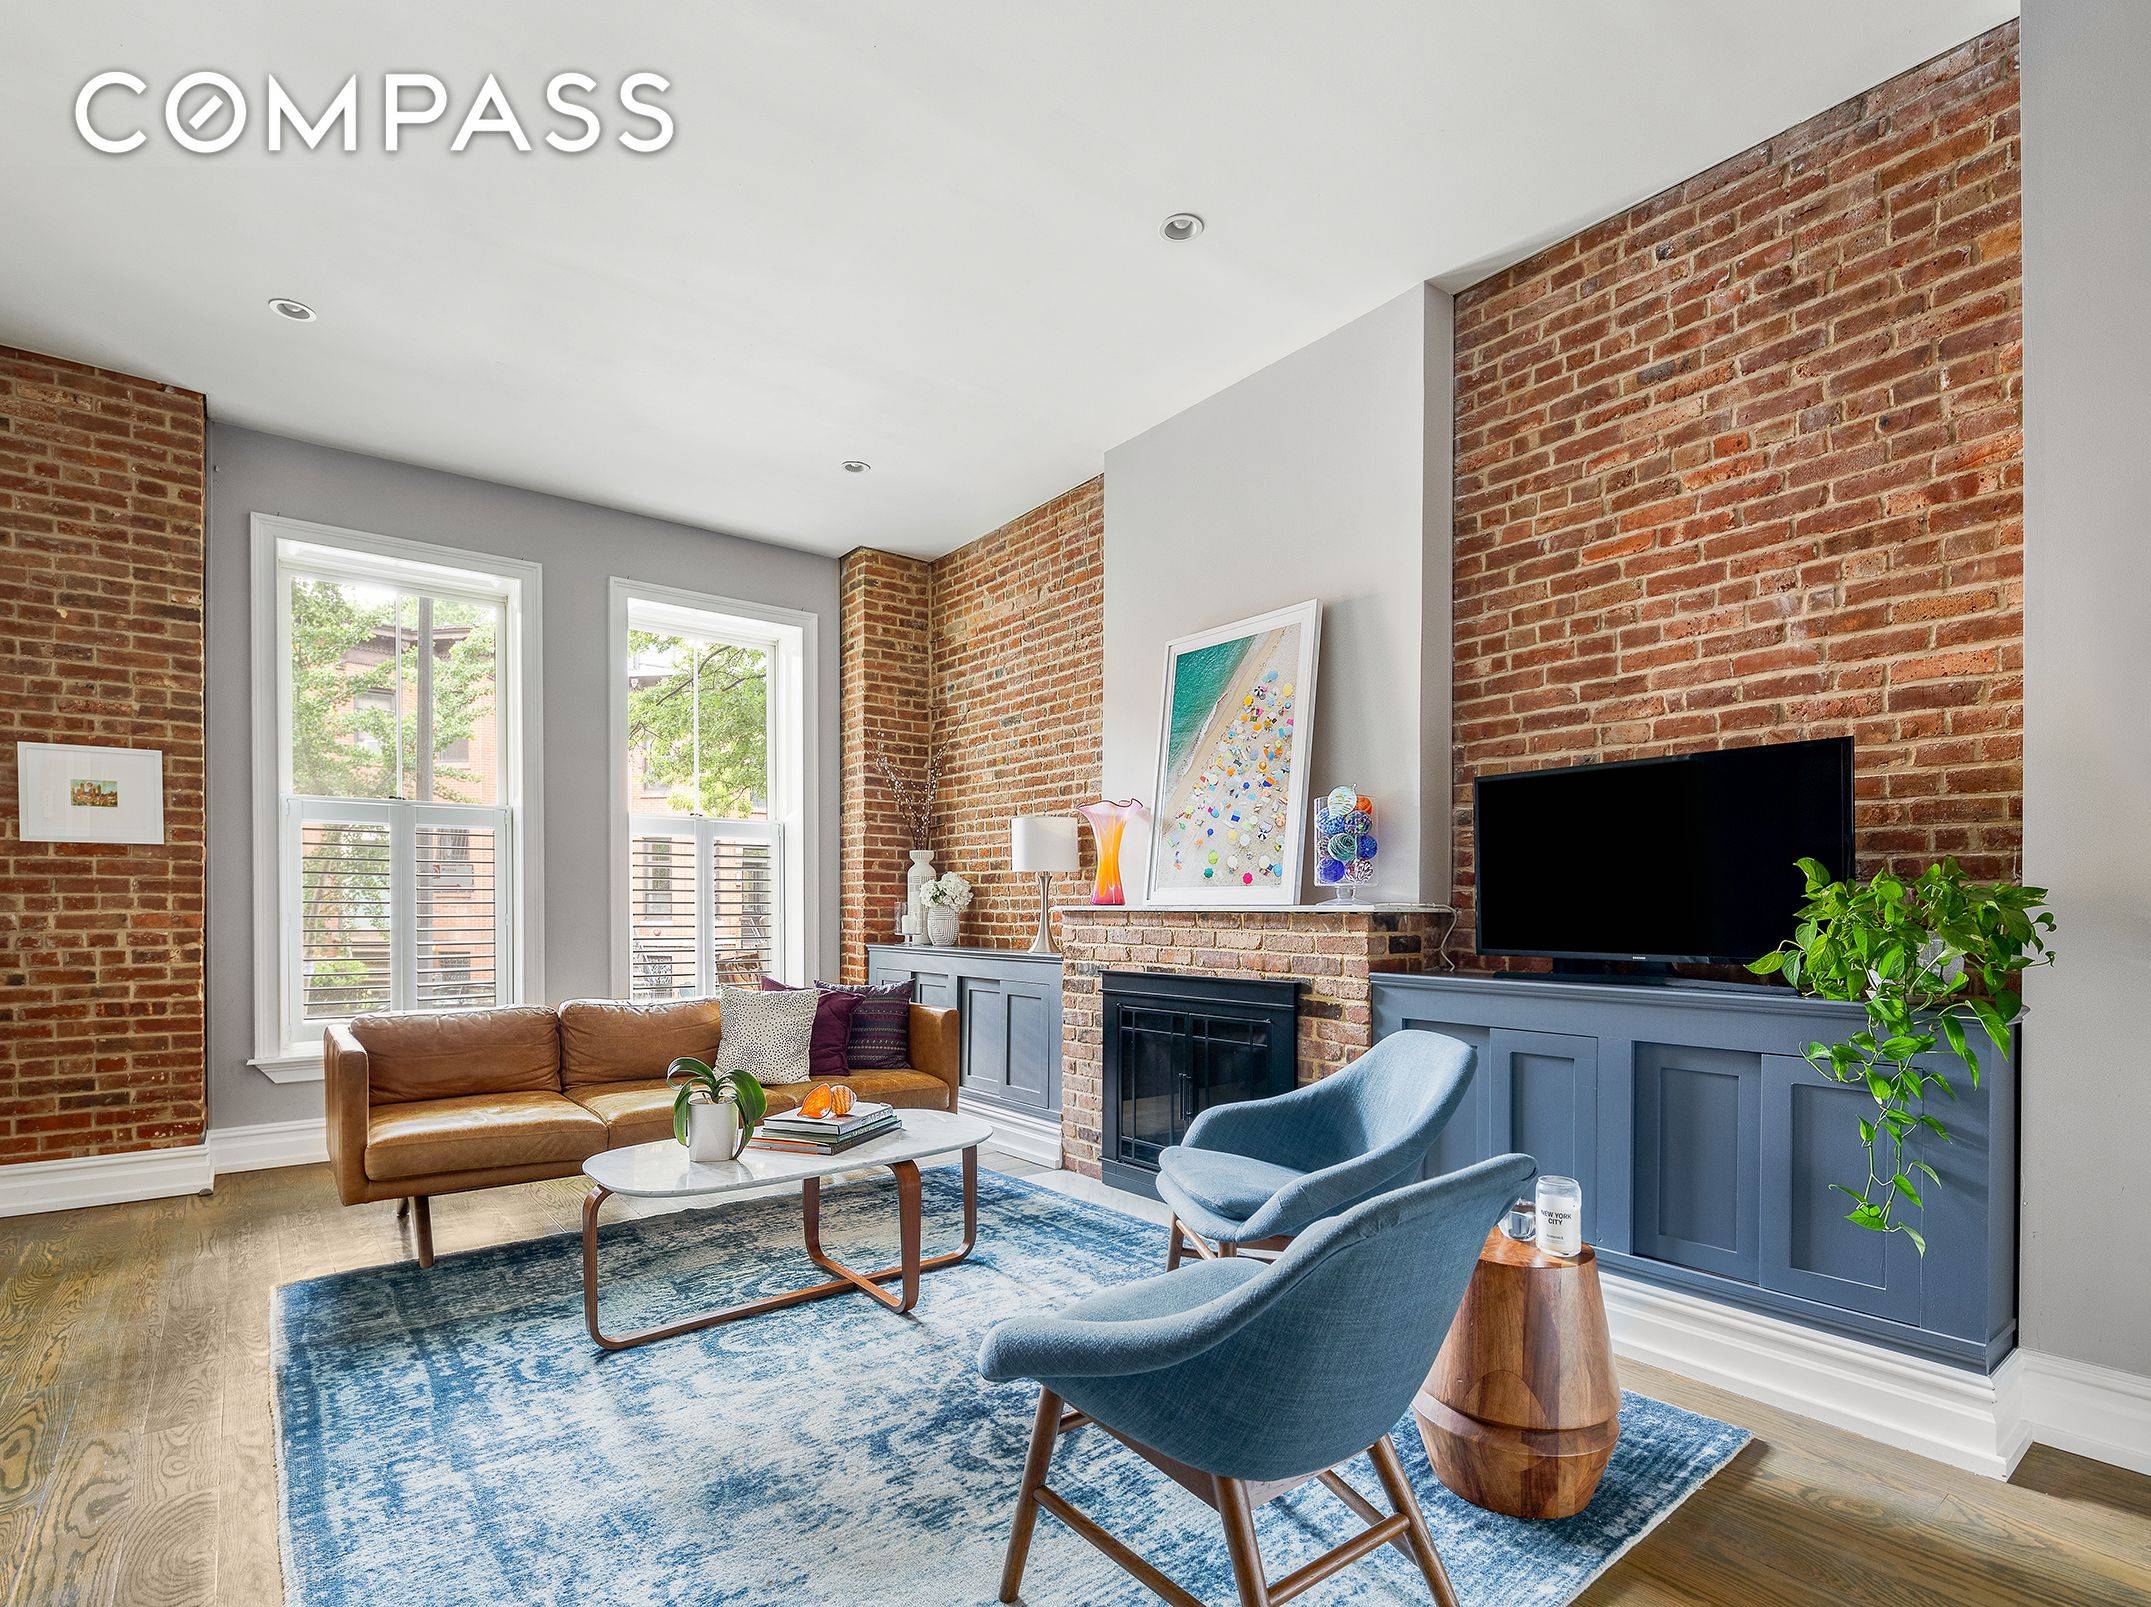 With stunning architectural details, modern updates and an enchanting private garden, this two bedroom, two and a half bathroom brownstone condominium is a rare find in coveted Park Slope.